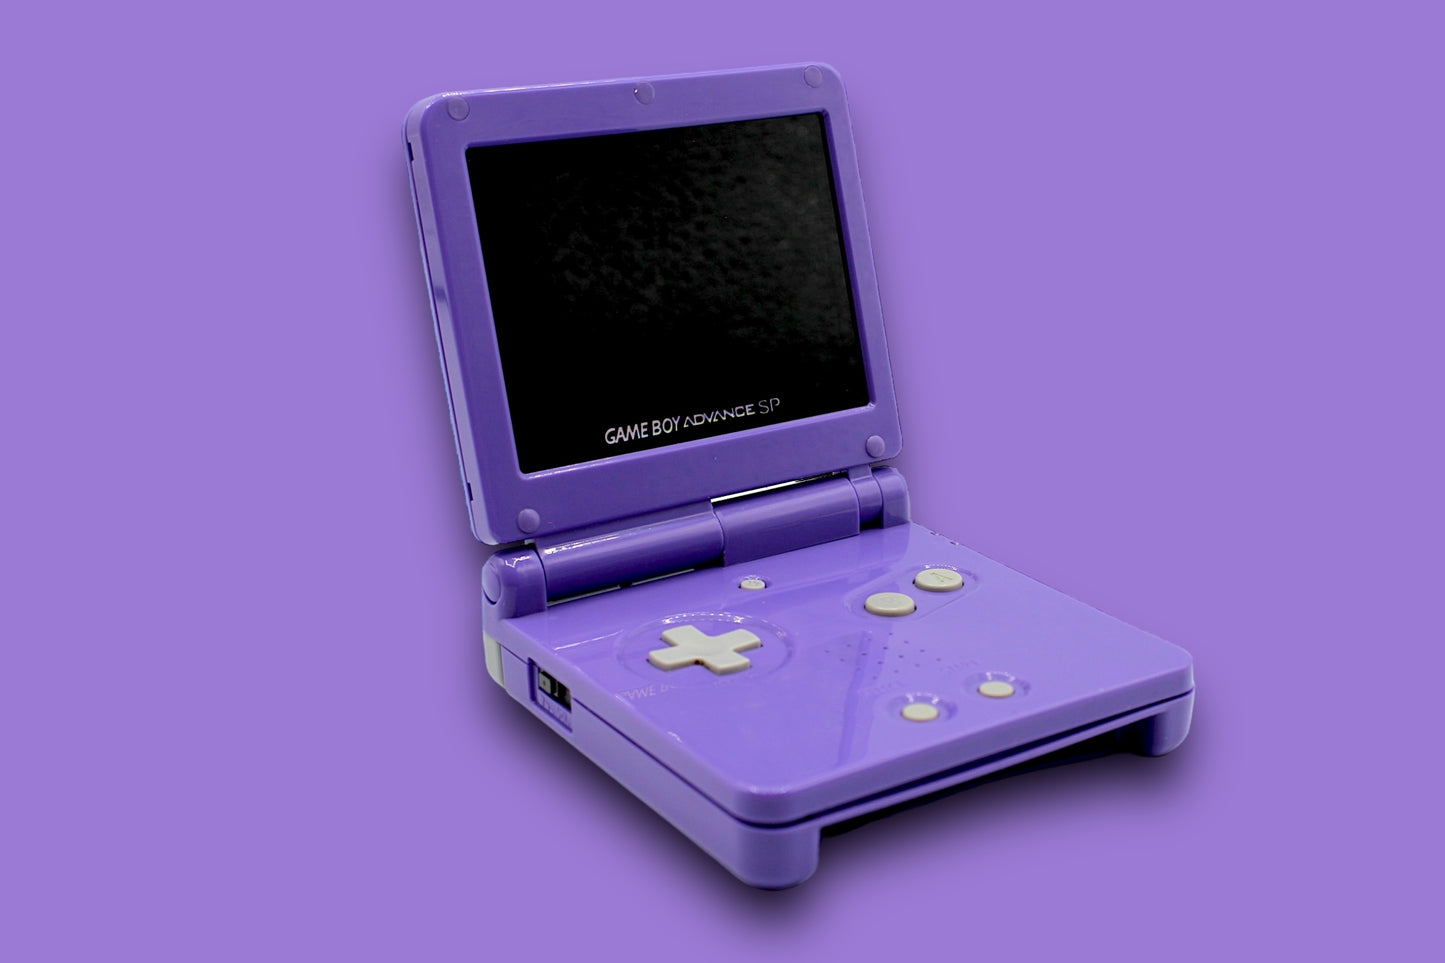 Mewtwo themed Game Boy Advance SP W/ IPS Screen V3